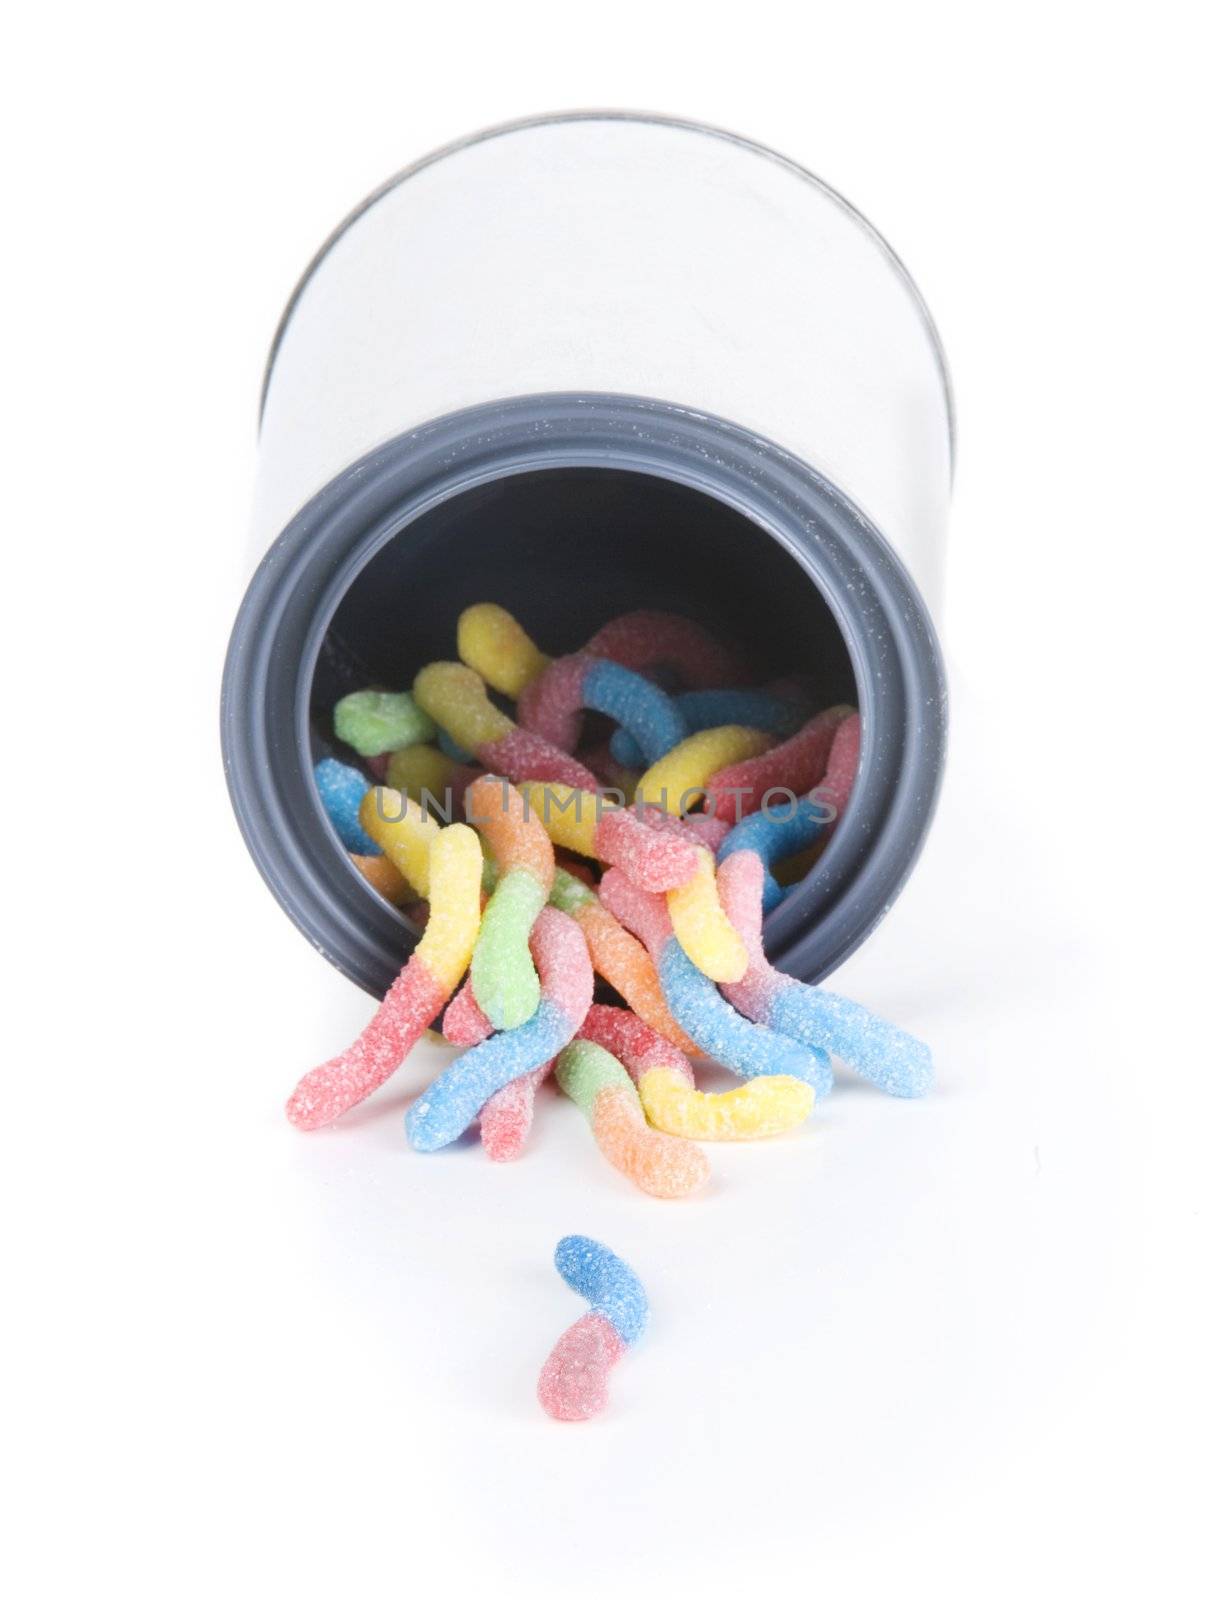 Shiny can of candy worms isolated against a white background